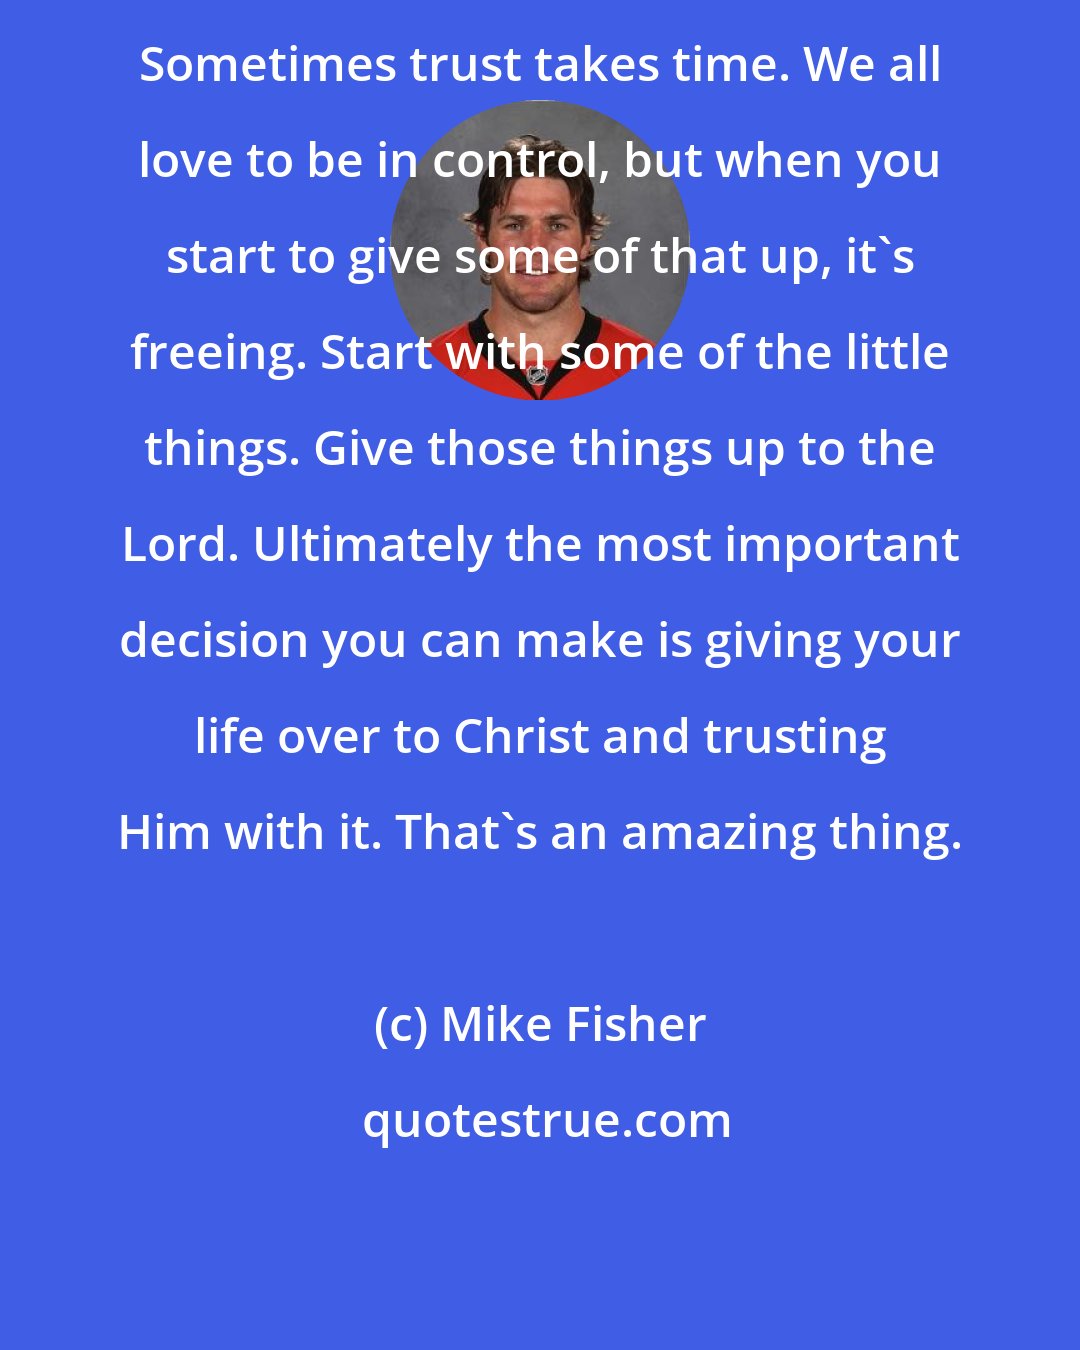 Mike Fisher: Sometimes trust takes time. We all love to be in control, but when you start to give some of that up, it's freeing. Start with some of the little things. Give those things up to the Lord. Ultimately the most important decision you can make is giving your life over to Christ and trusting Him with it. That's an amazing thing.